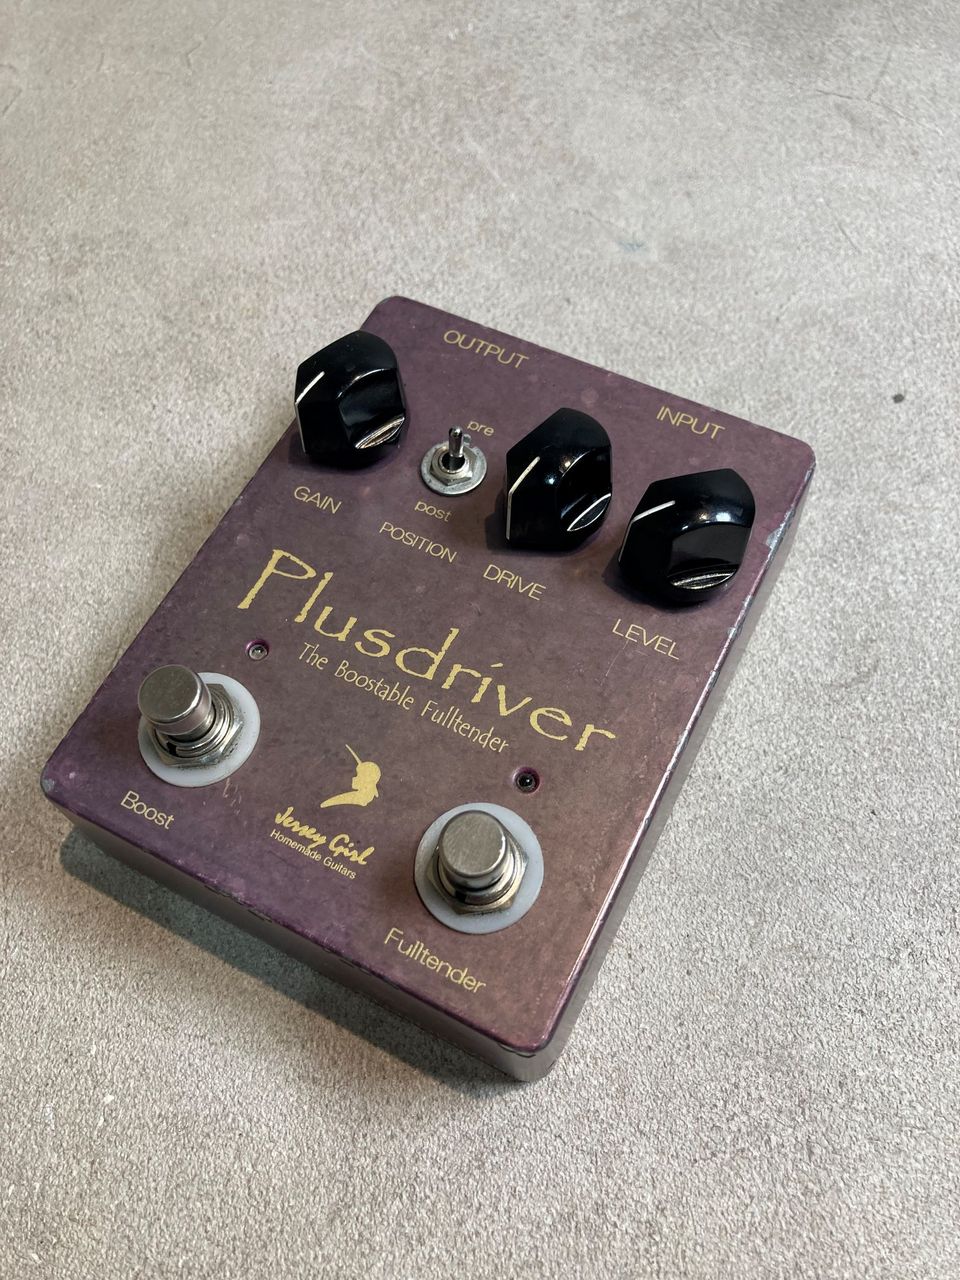 USED Jersey Girl Plusdriver